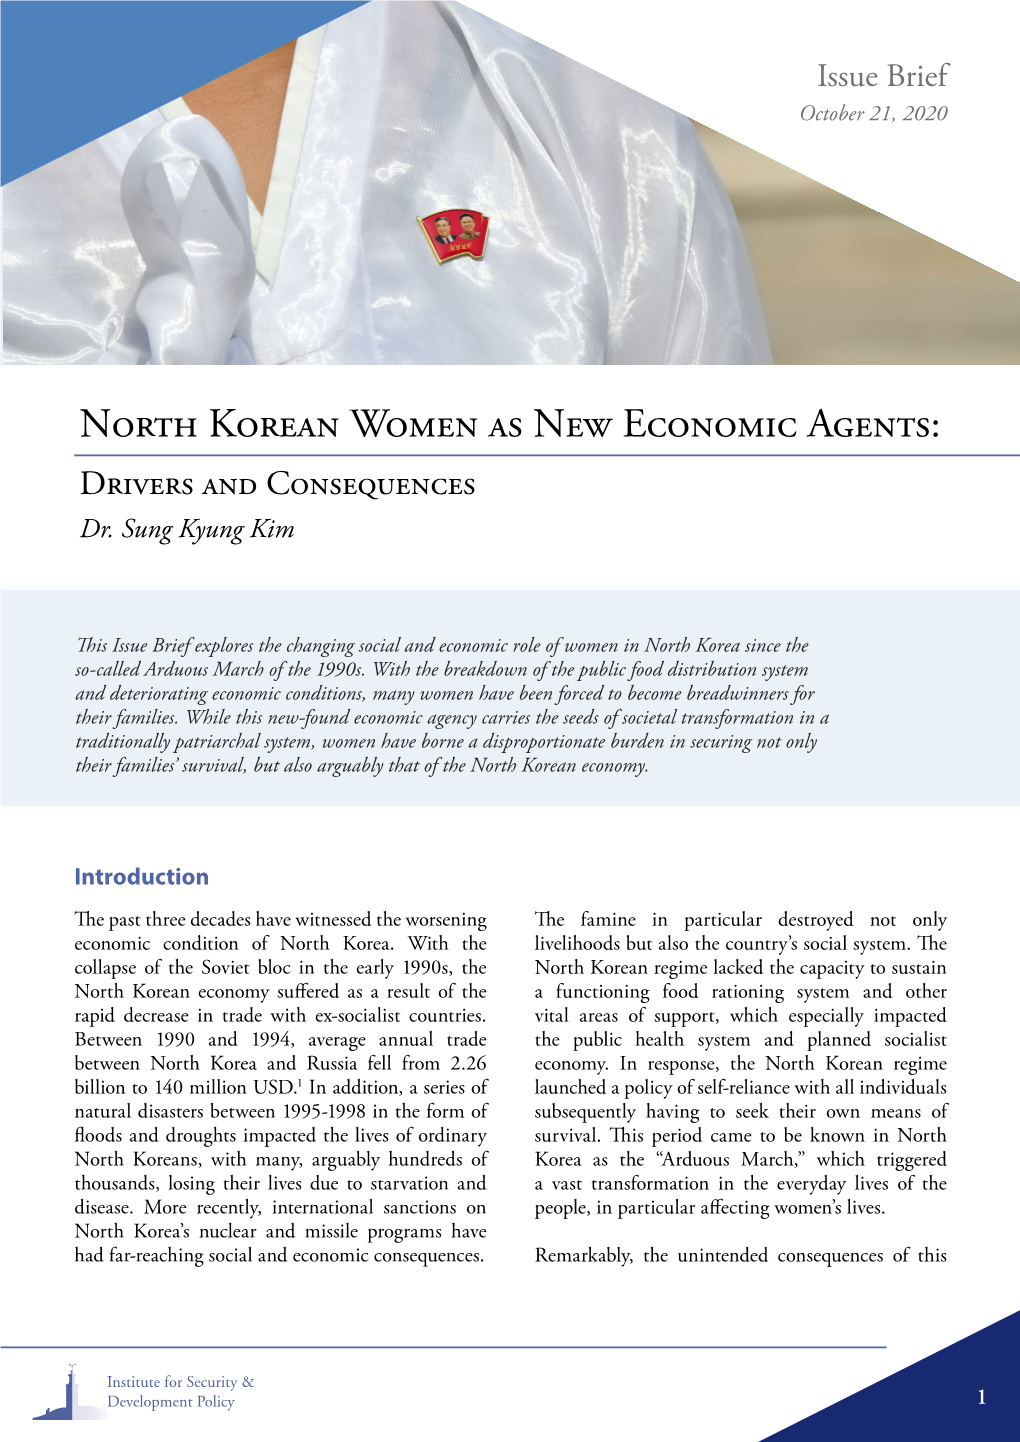 North Korean Women As New Economic Agents: Drivers and Consequences Dr